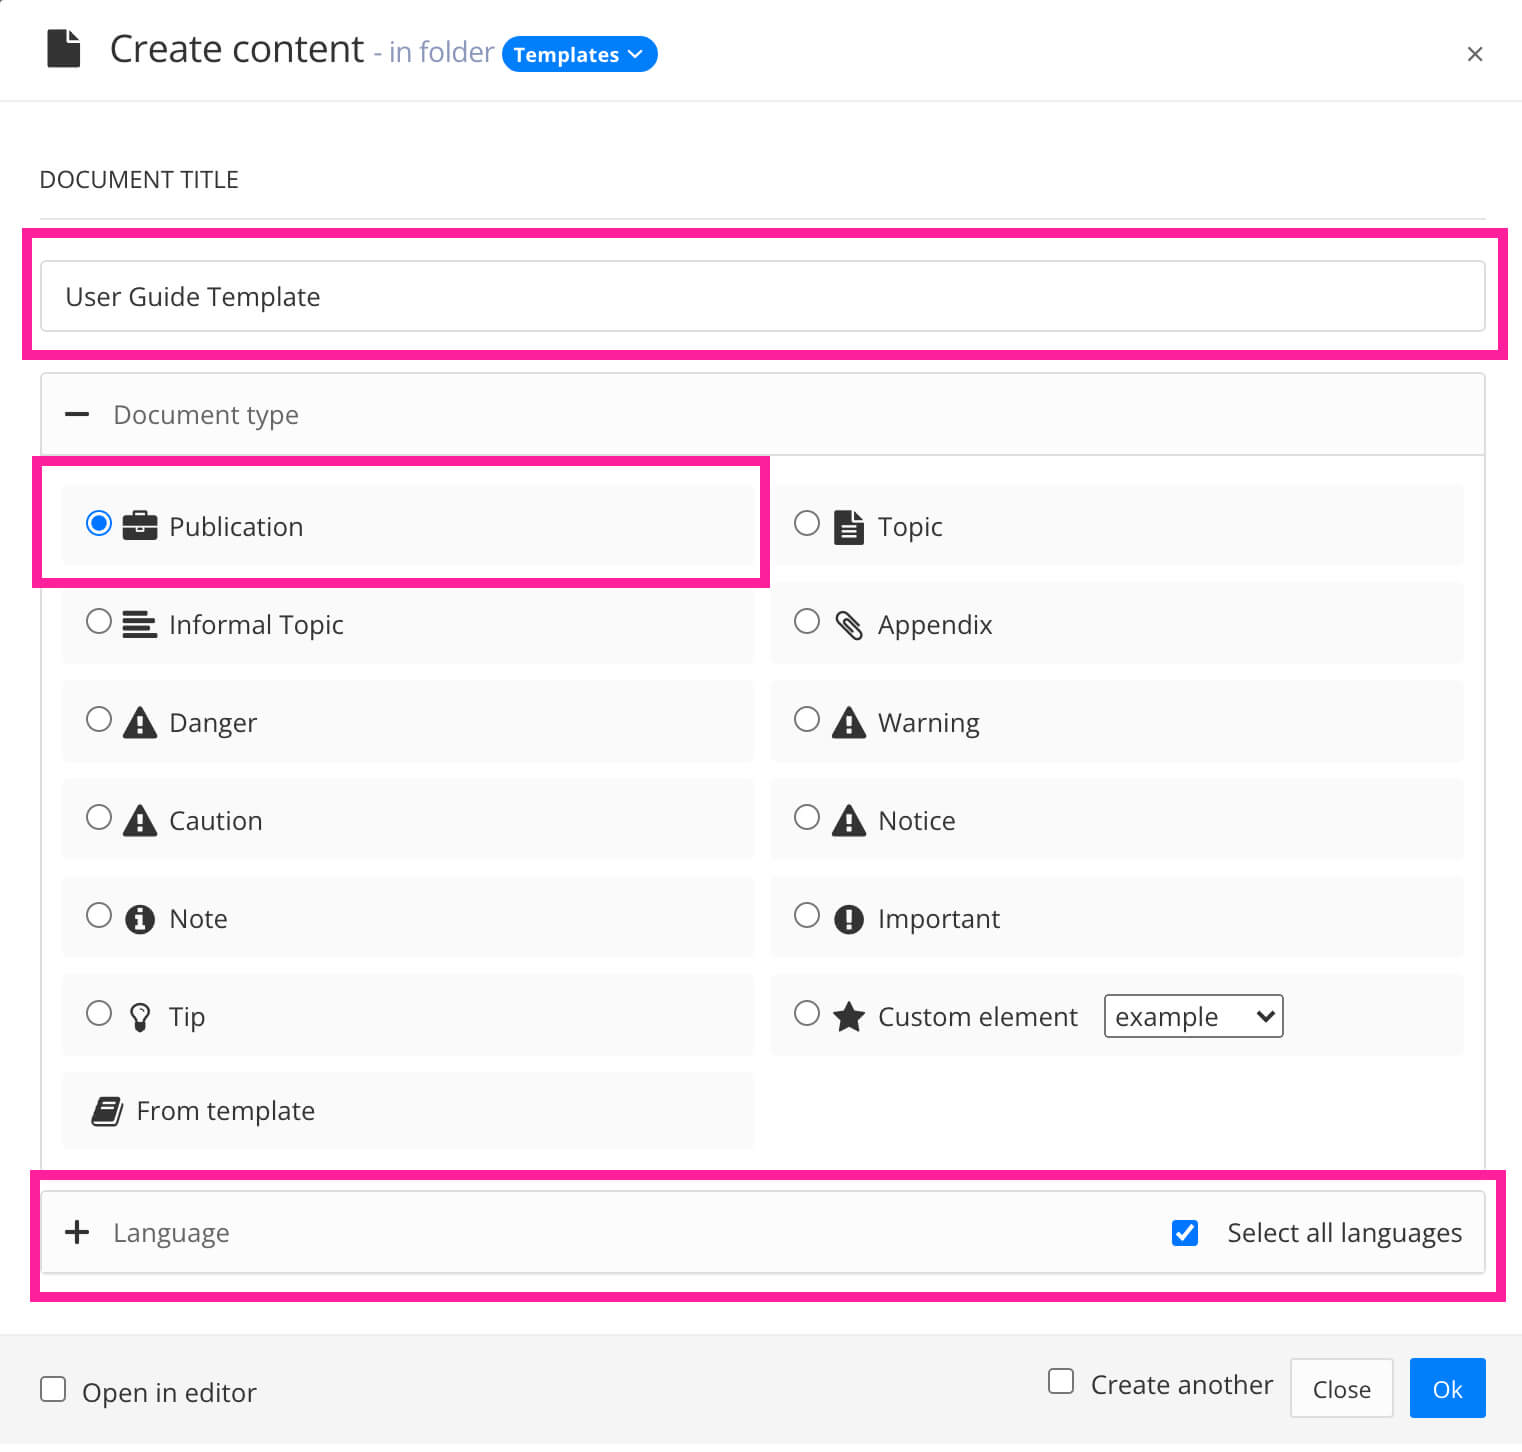 Create content dialog for templates. There is a field to enter a name, options for selecting the document type and publication is selected. There is also a section for choosing languages.